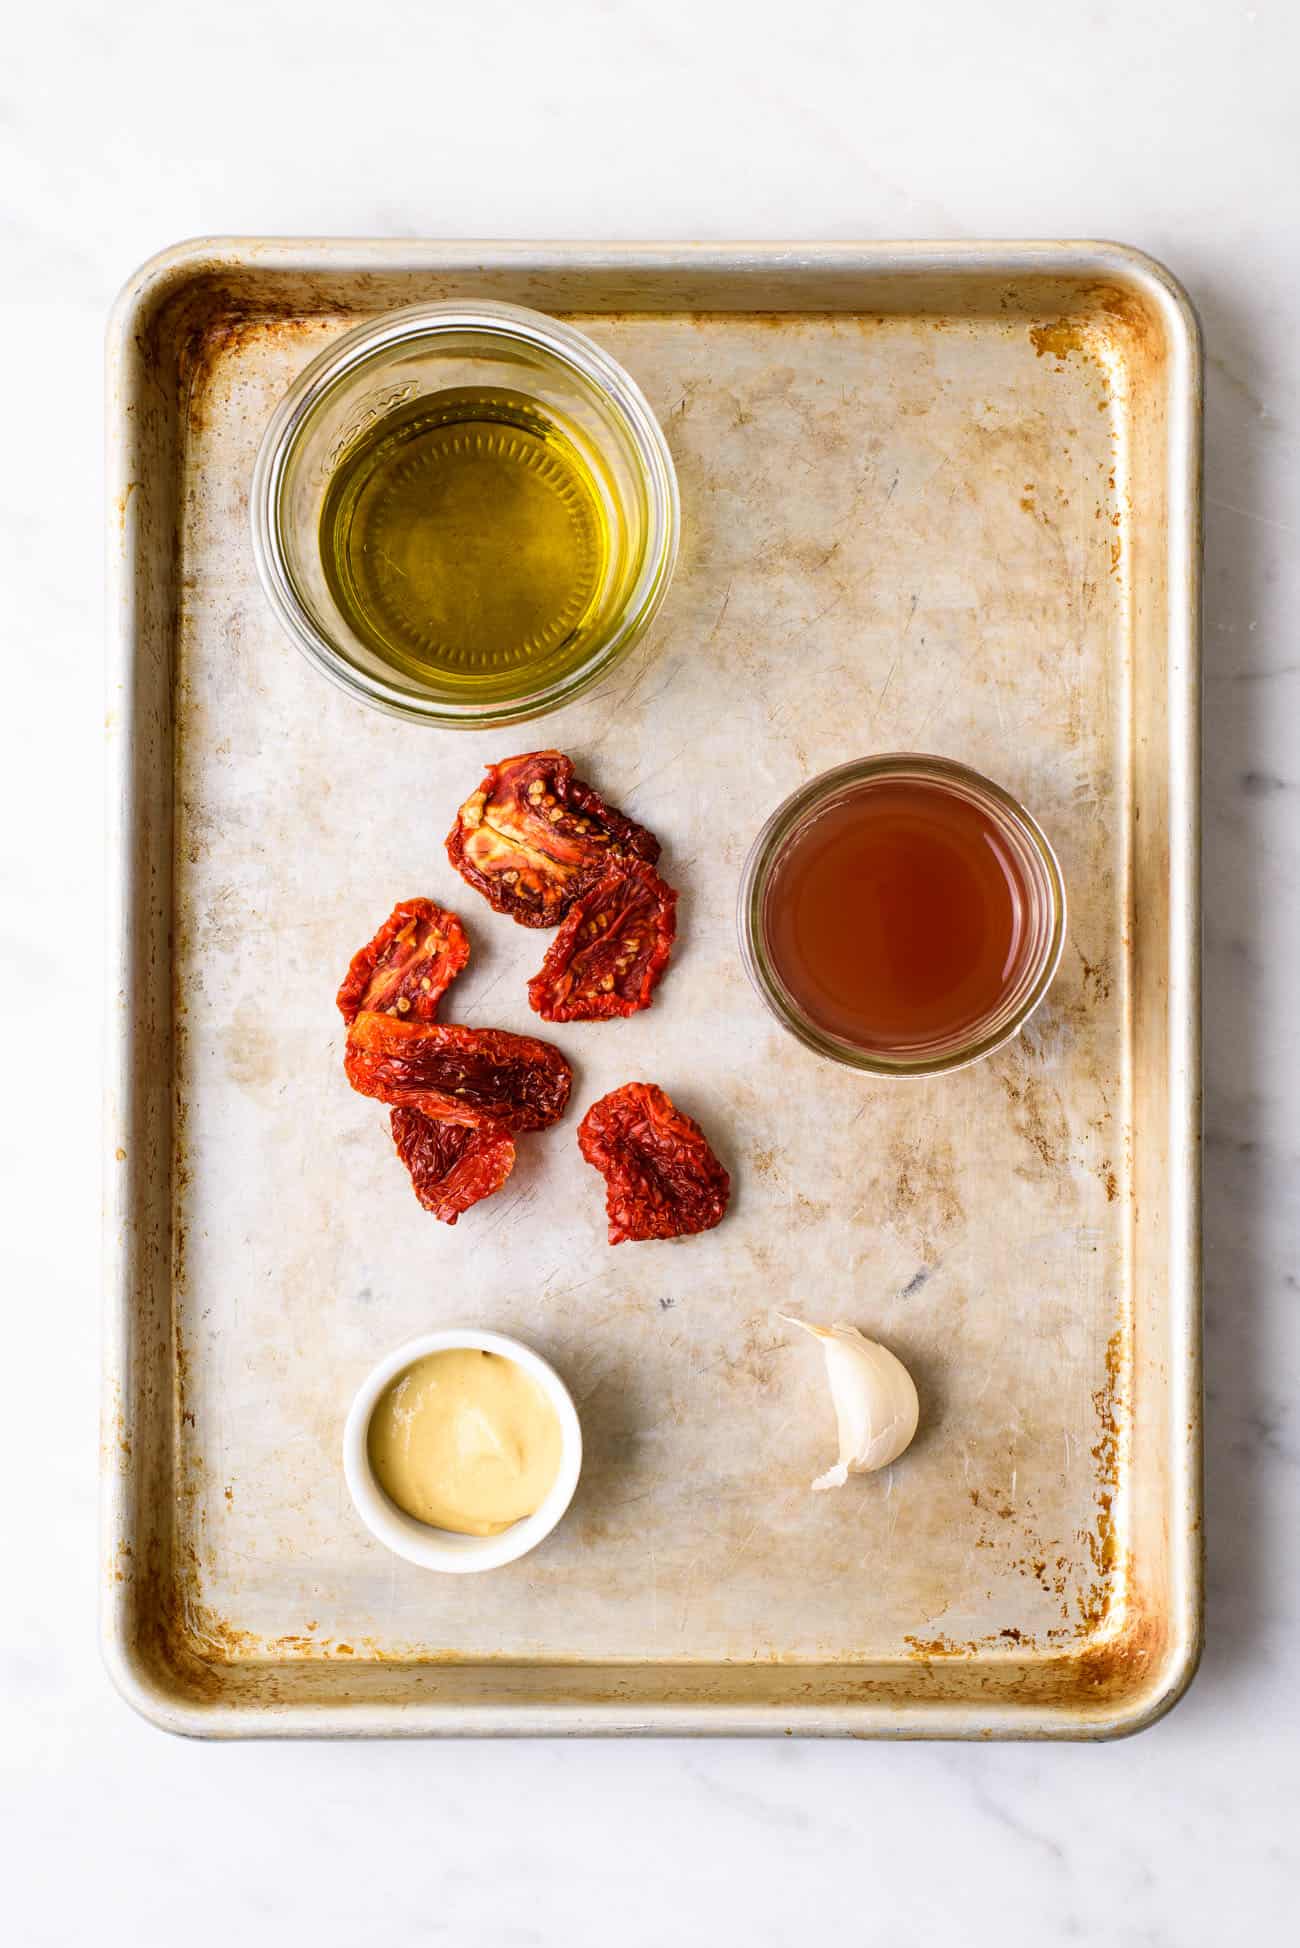 Ingredients to make sun-dried tomato vinaigrette gathered on a baking sheet: olive oil, sun-dried tomatoes, vinegar, mustard, and garlic